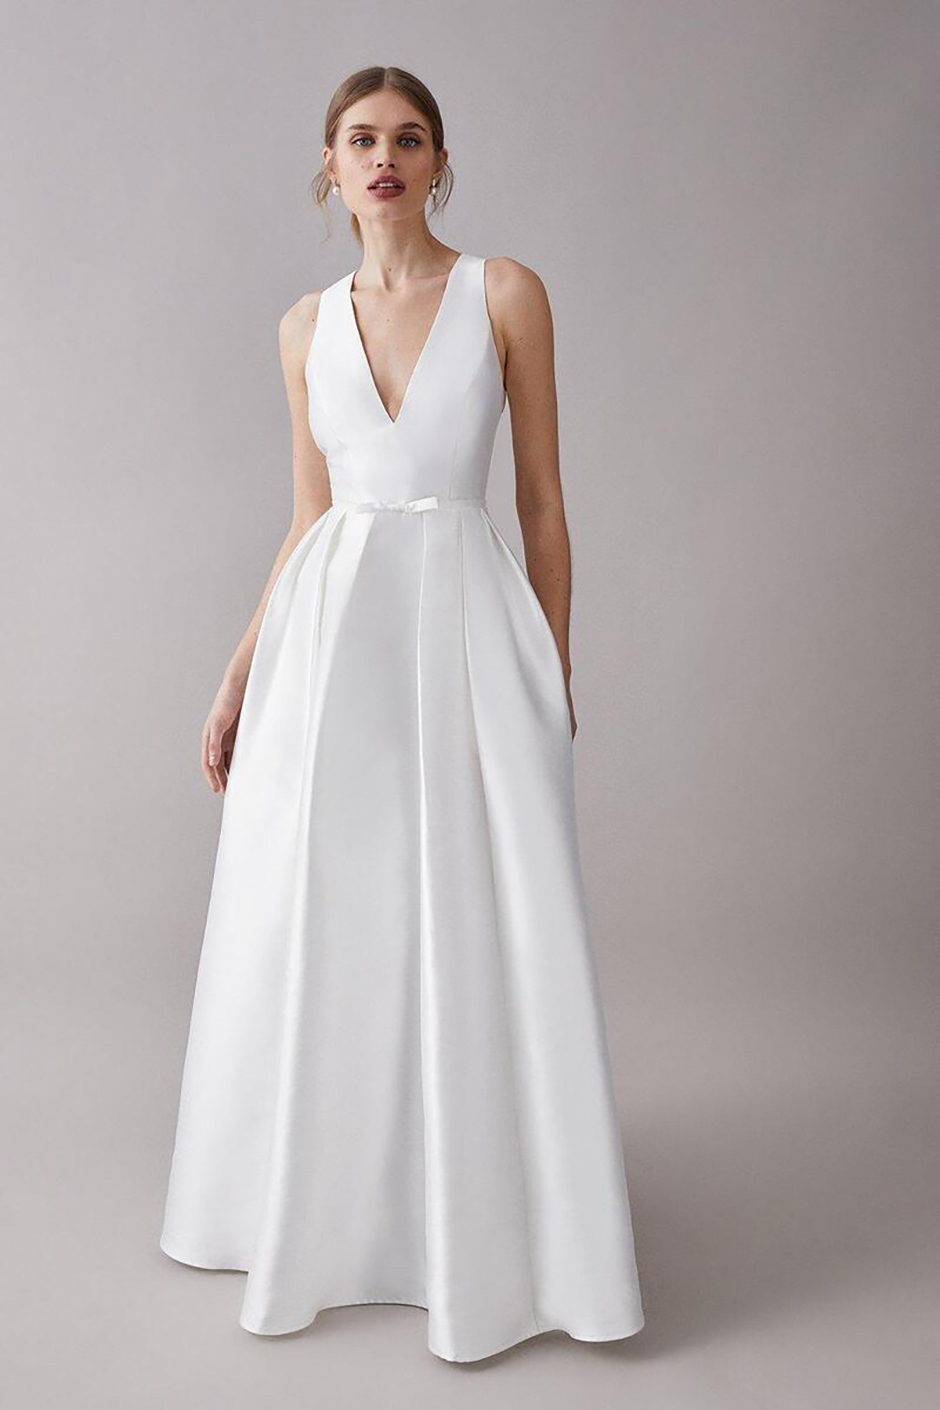 Traditional wedding dress with pockets, a plunge neckline and minimal bow at the waist from Coast and Debenhams 